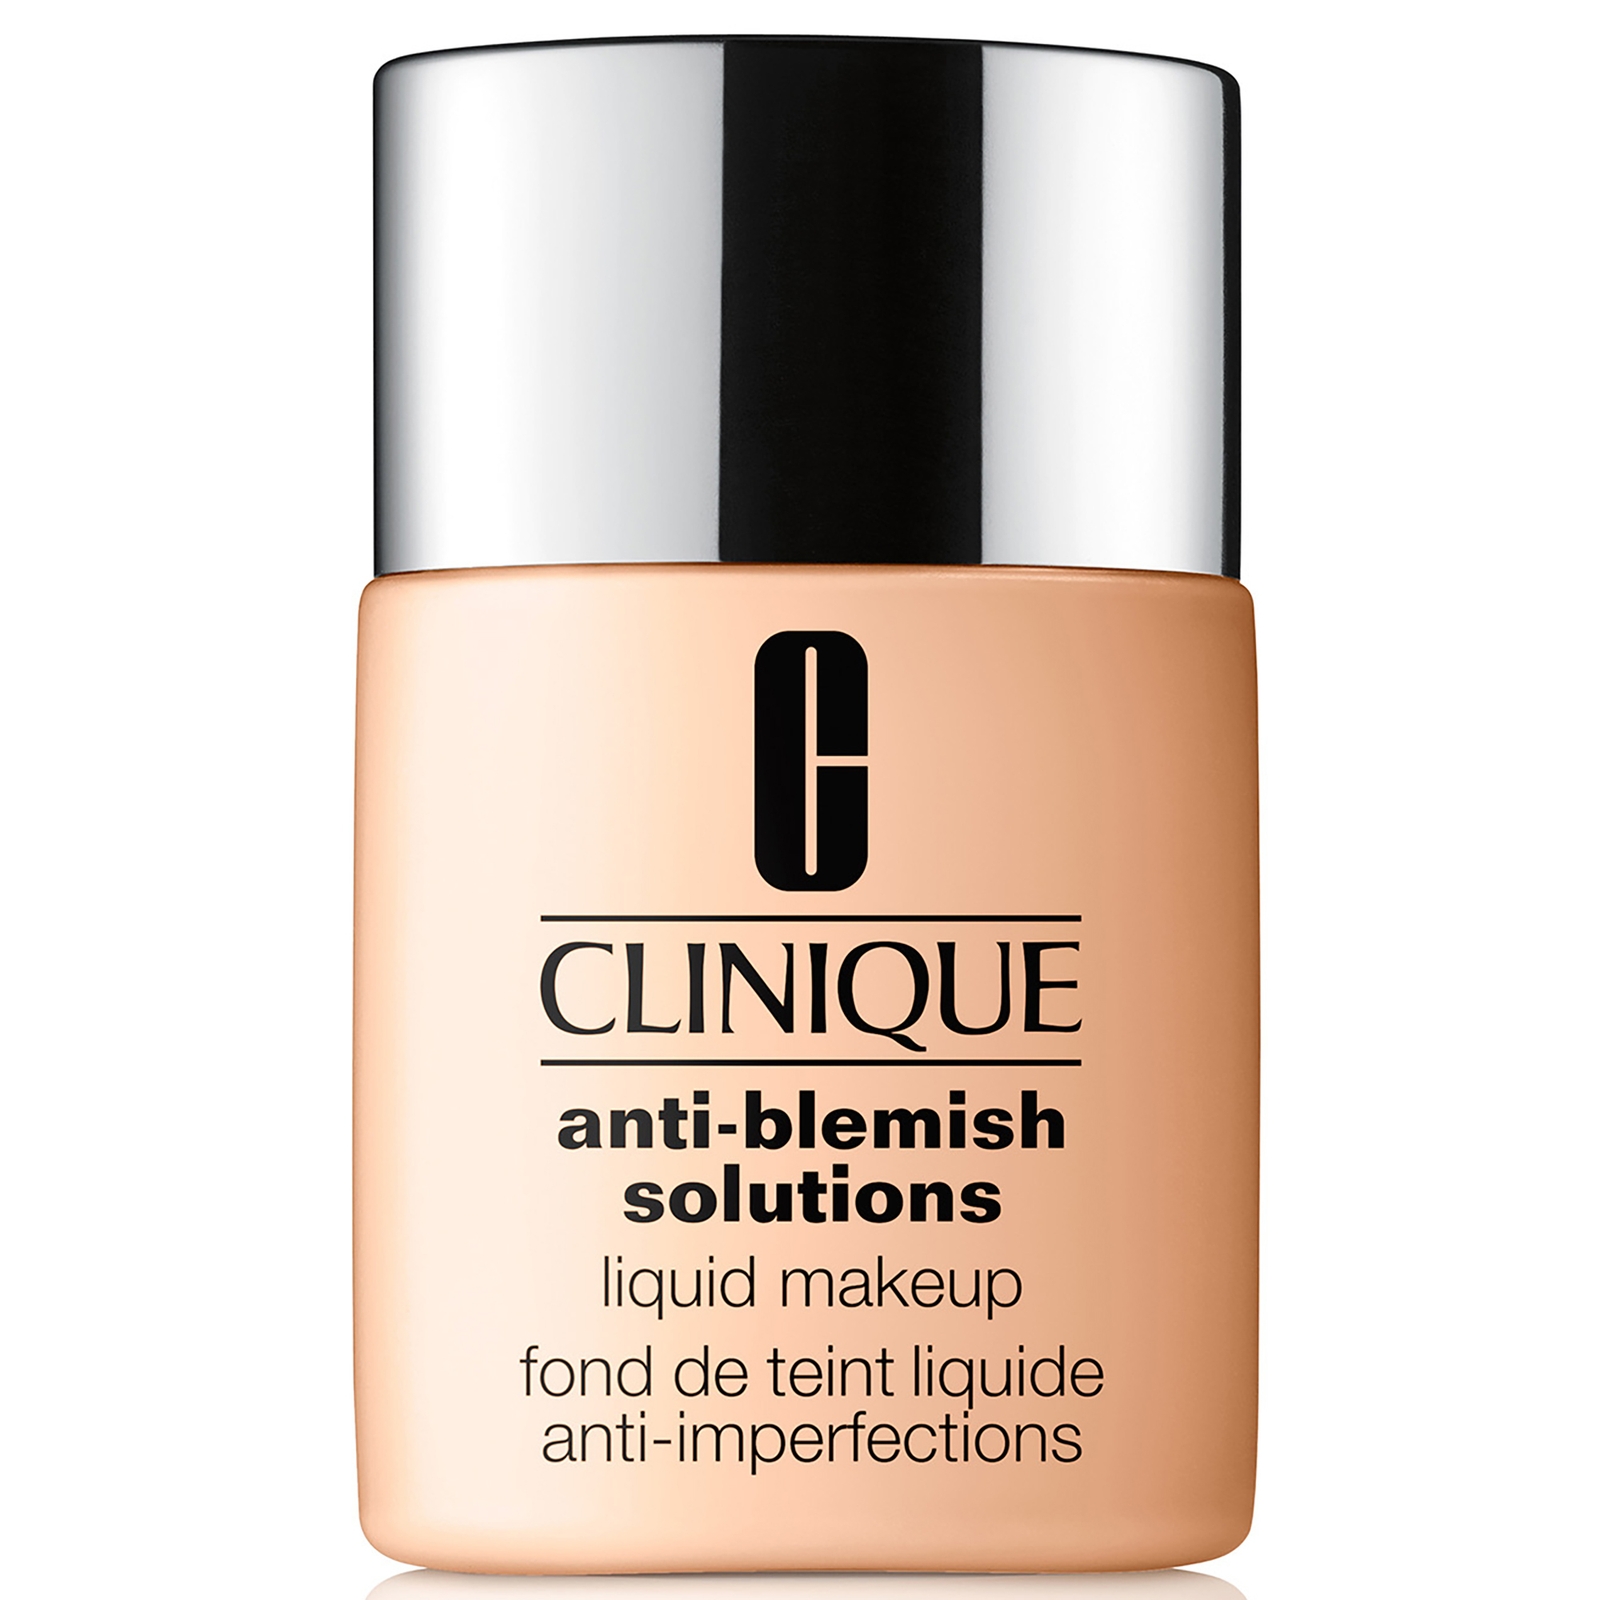 Clinique Anti-Blemish Solutions Liquid Makeup with Salicylic Acid 30ml (Various Shades) - WN 01 Flax